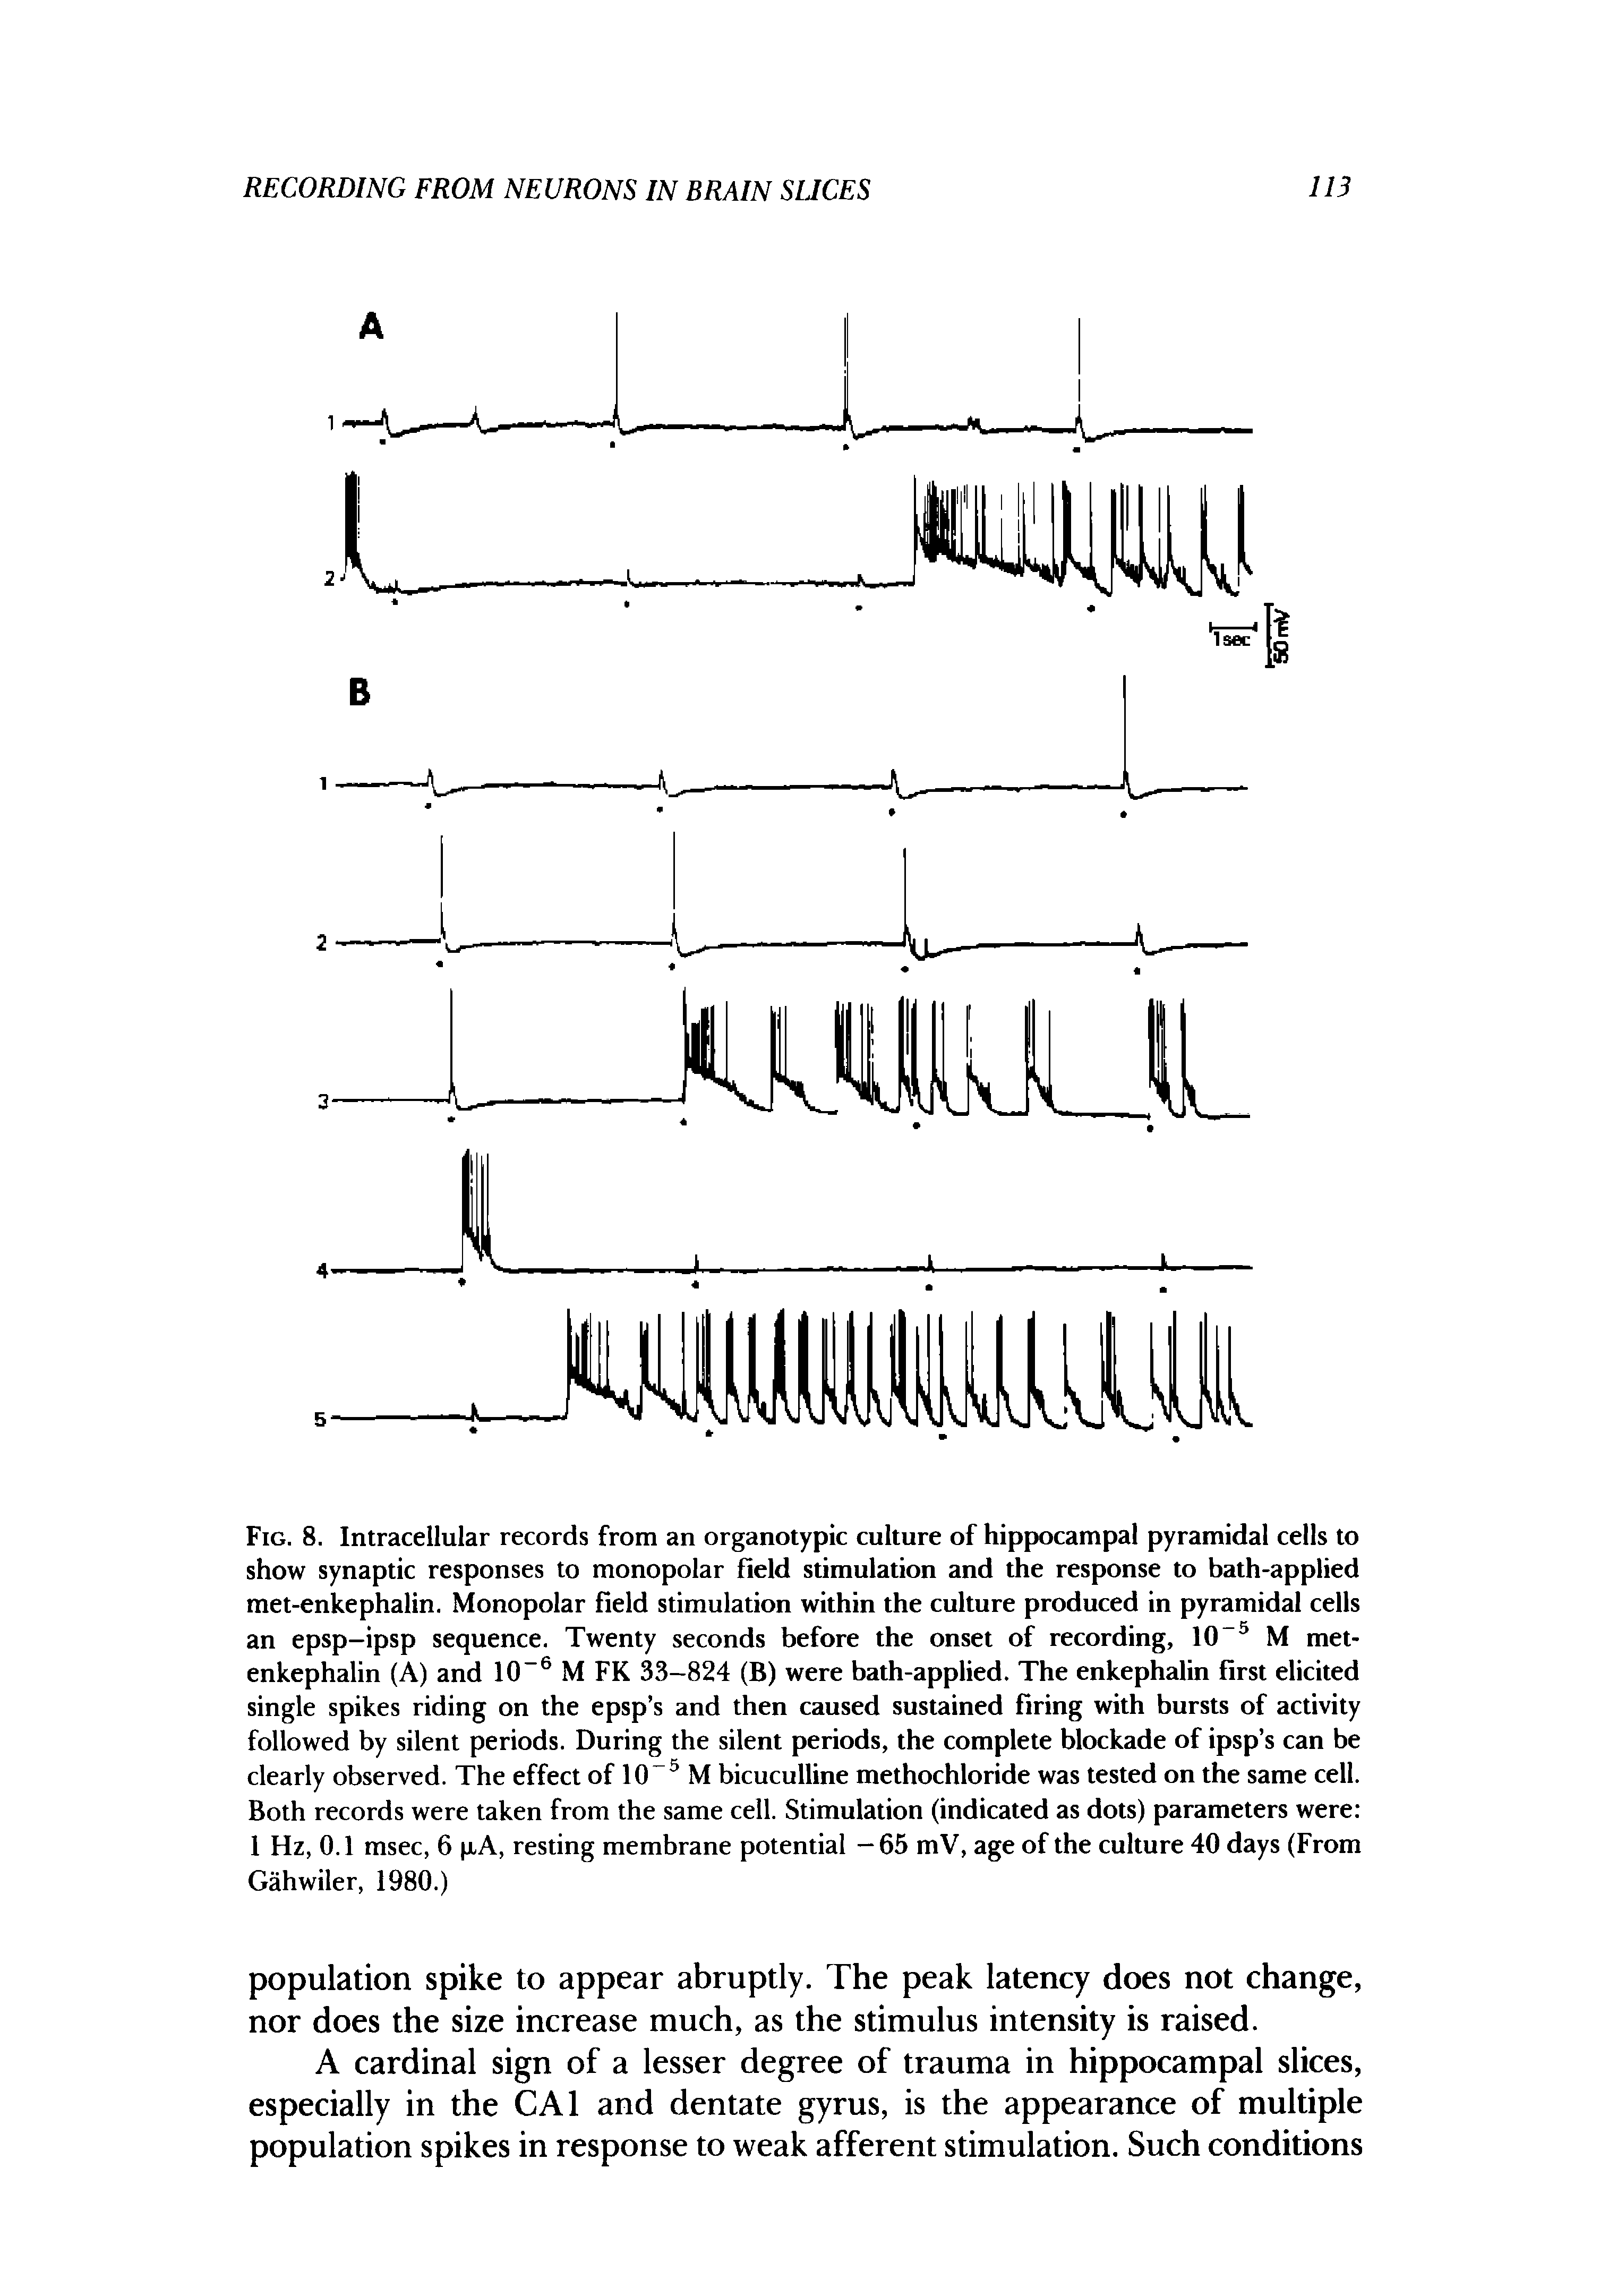 Fig. 8. Intracellular records from an organotypic culture of hippocampal pyramidal cells to show synaptic responses to monopolar field stimulation and the response to bath-applied met-enkephalin. Monopolar field stimulation within the culture produced in pyramidal cells an epsp-ipsp sequence. Twenty seconds before the onset of recording, 10 M met-enkephalin (A) and 10 M FK 33-824 (B) were bath-applied. The enkephalin first elicited single spikes riding on the epsp s and then caused sustained firing with bursts of activity followed by silent periods. During the silent periods, the complete blockade of ipsp s can be clearly observed. The effect of M bicuculline methochloride was tested on the same cell. Both records were taken from the same cell. Stimulation (indicated as dots) parameters were 1 Hz, 0.1 msec, 6 xA, resting membrane potential -65 mV, age of the culture 40 days (From Gahwiler, 1980.)...